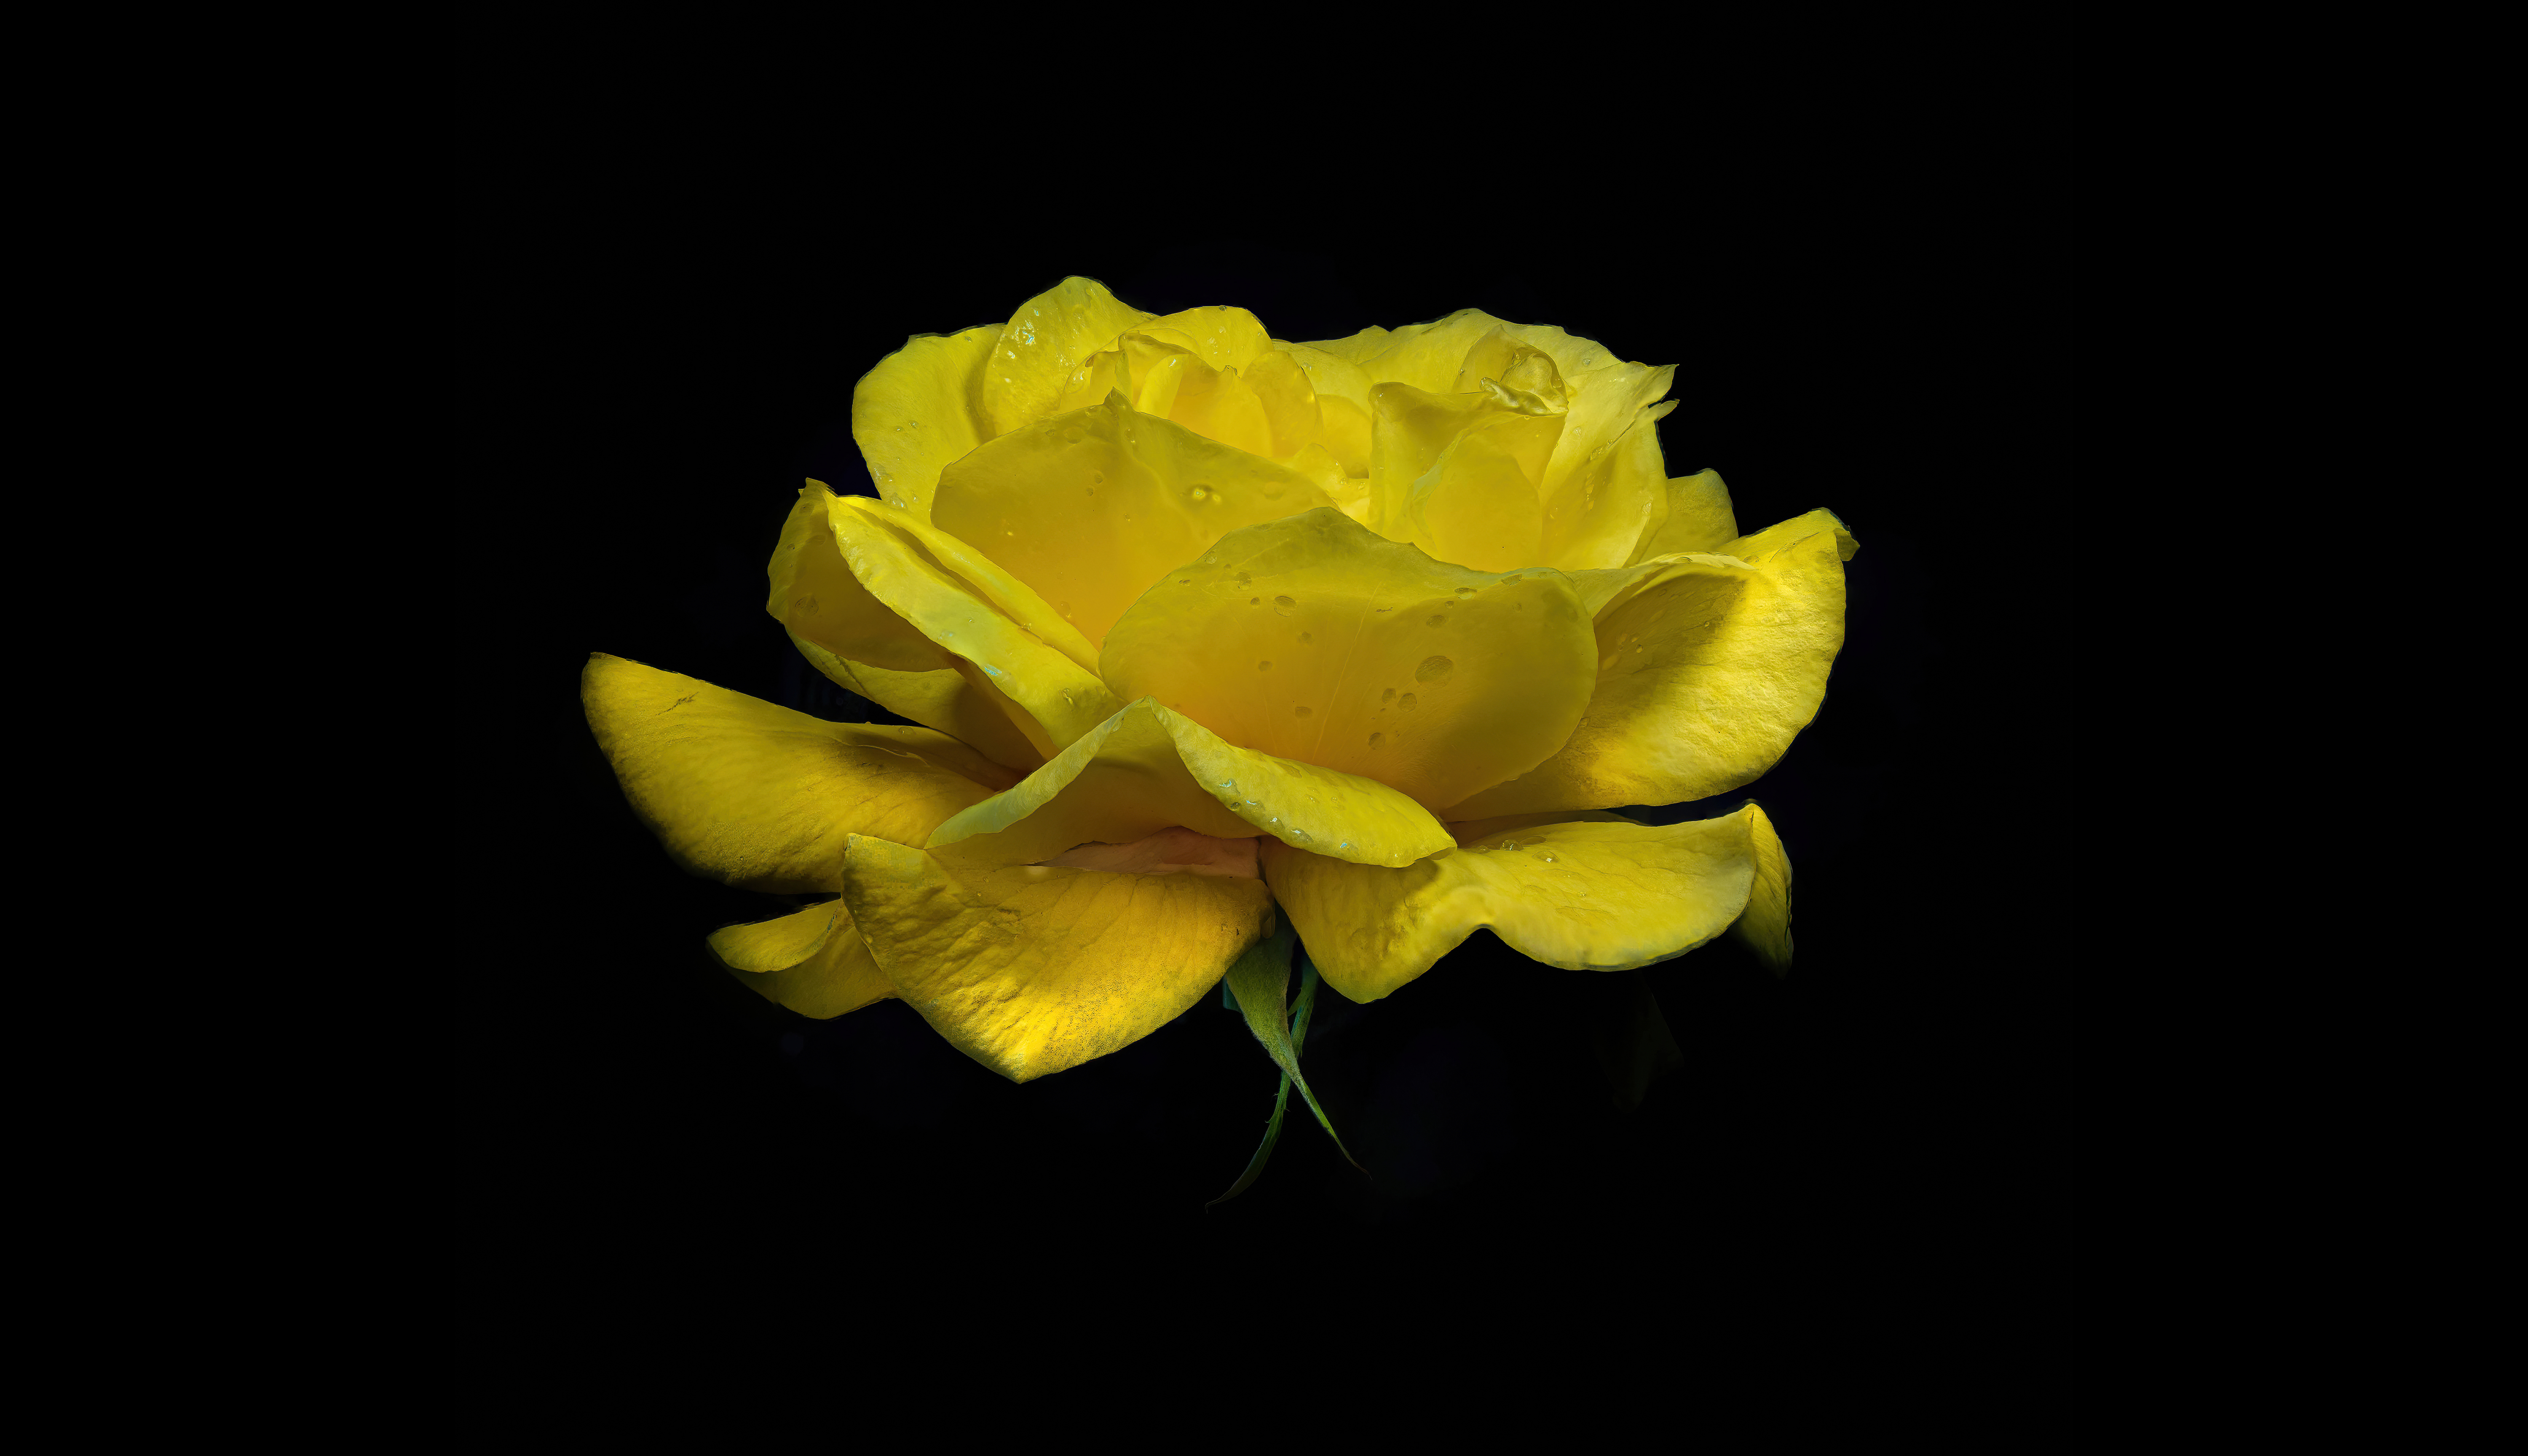 Yellow Rose wallpaper by MJS60  Download on ZEDGE  f059